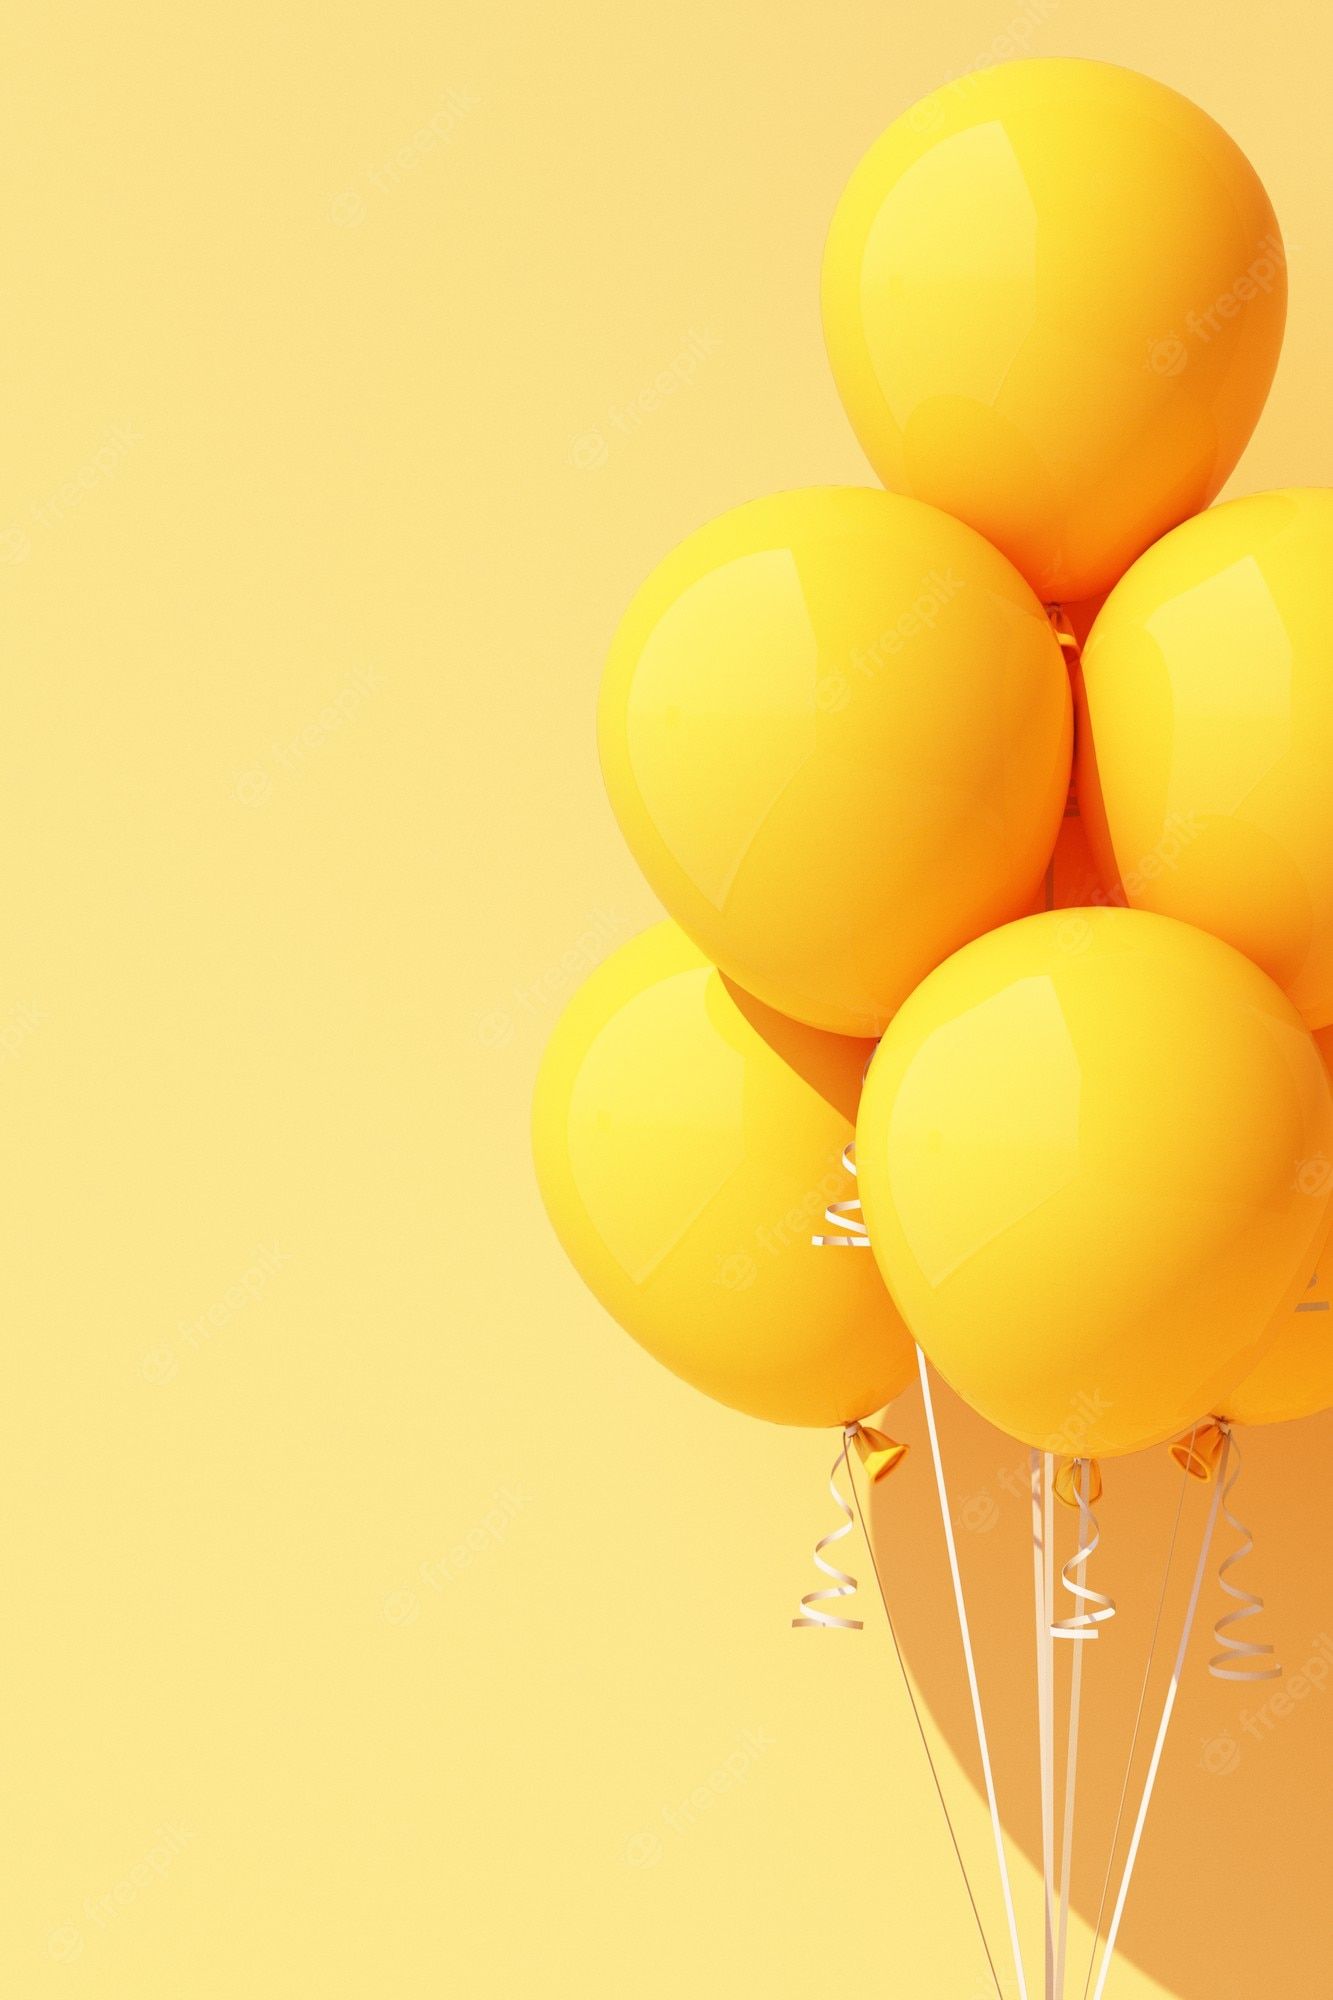 A bunch of yellow balloons on a yellow background - Balloons